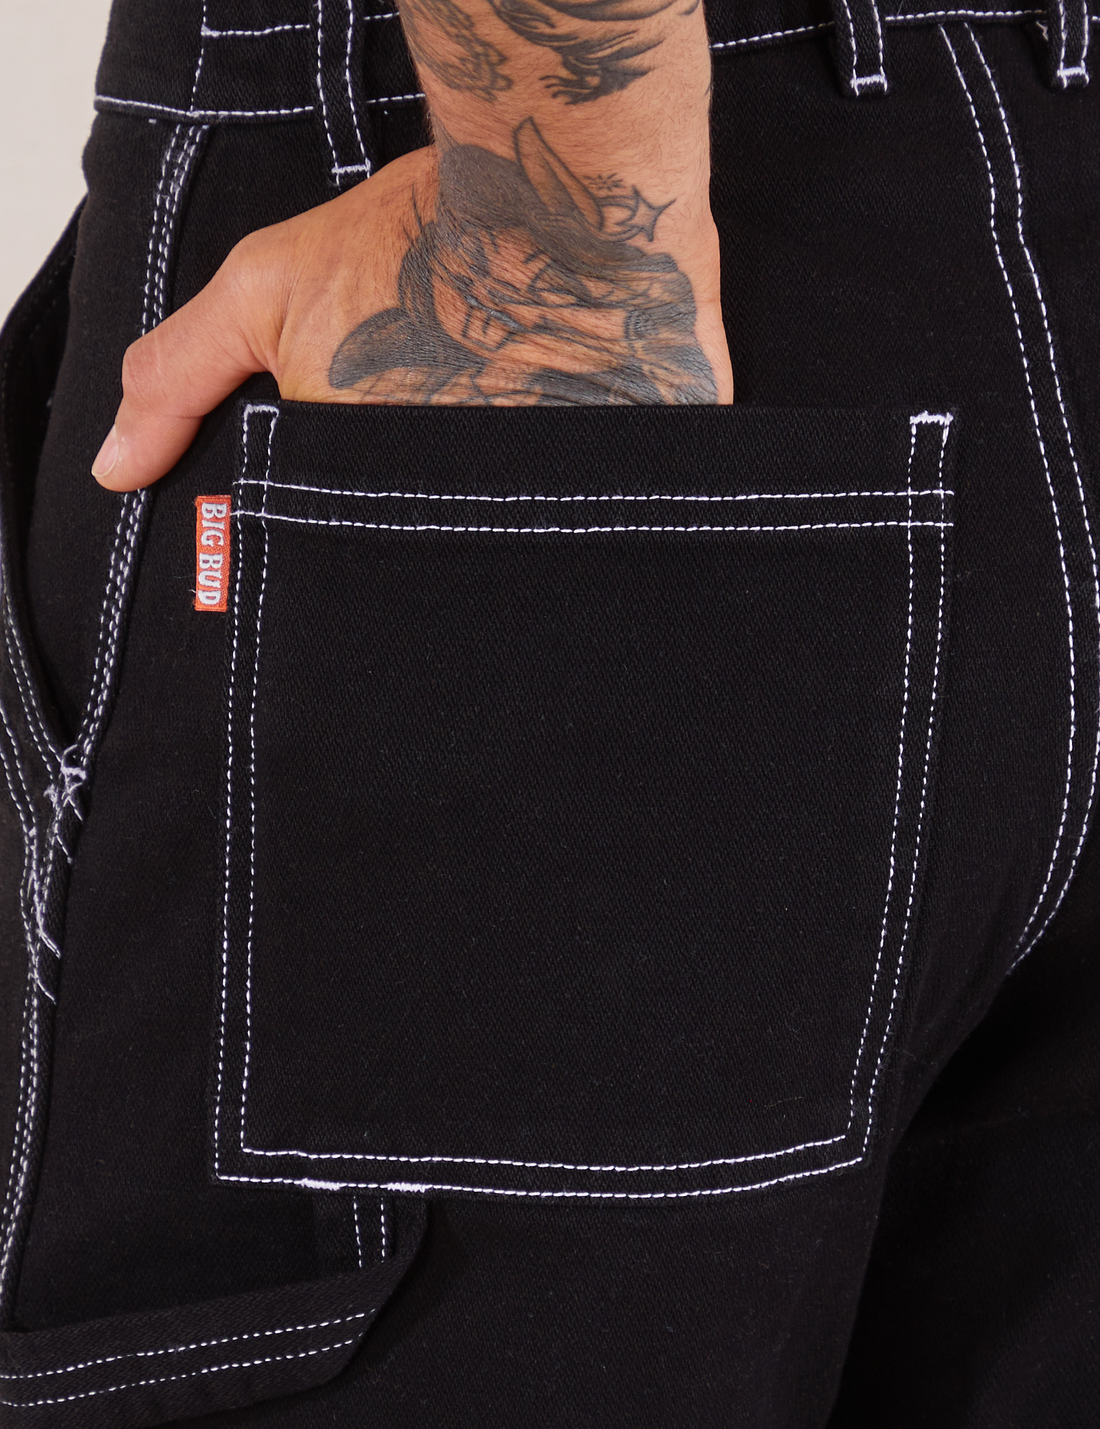 Carpenter Jeans in Black back pocket close up. Jesse has their hand in the pocket.